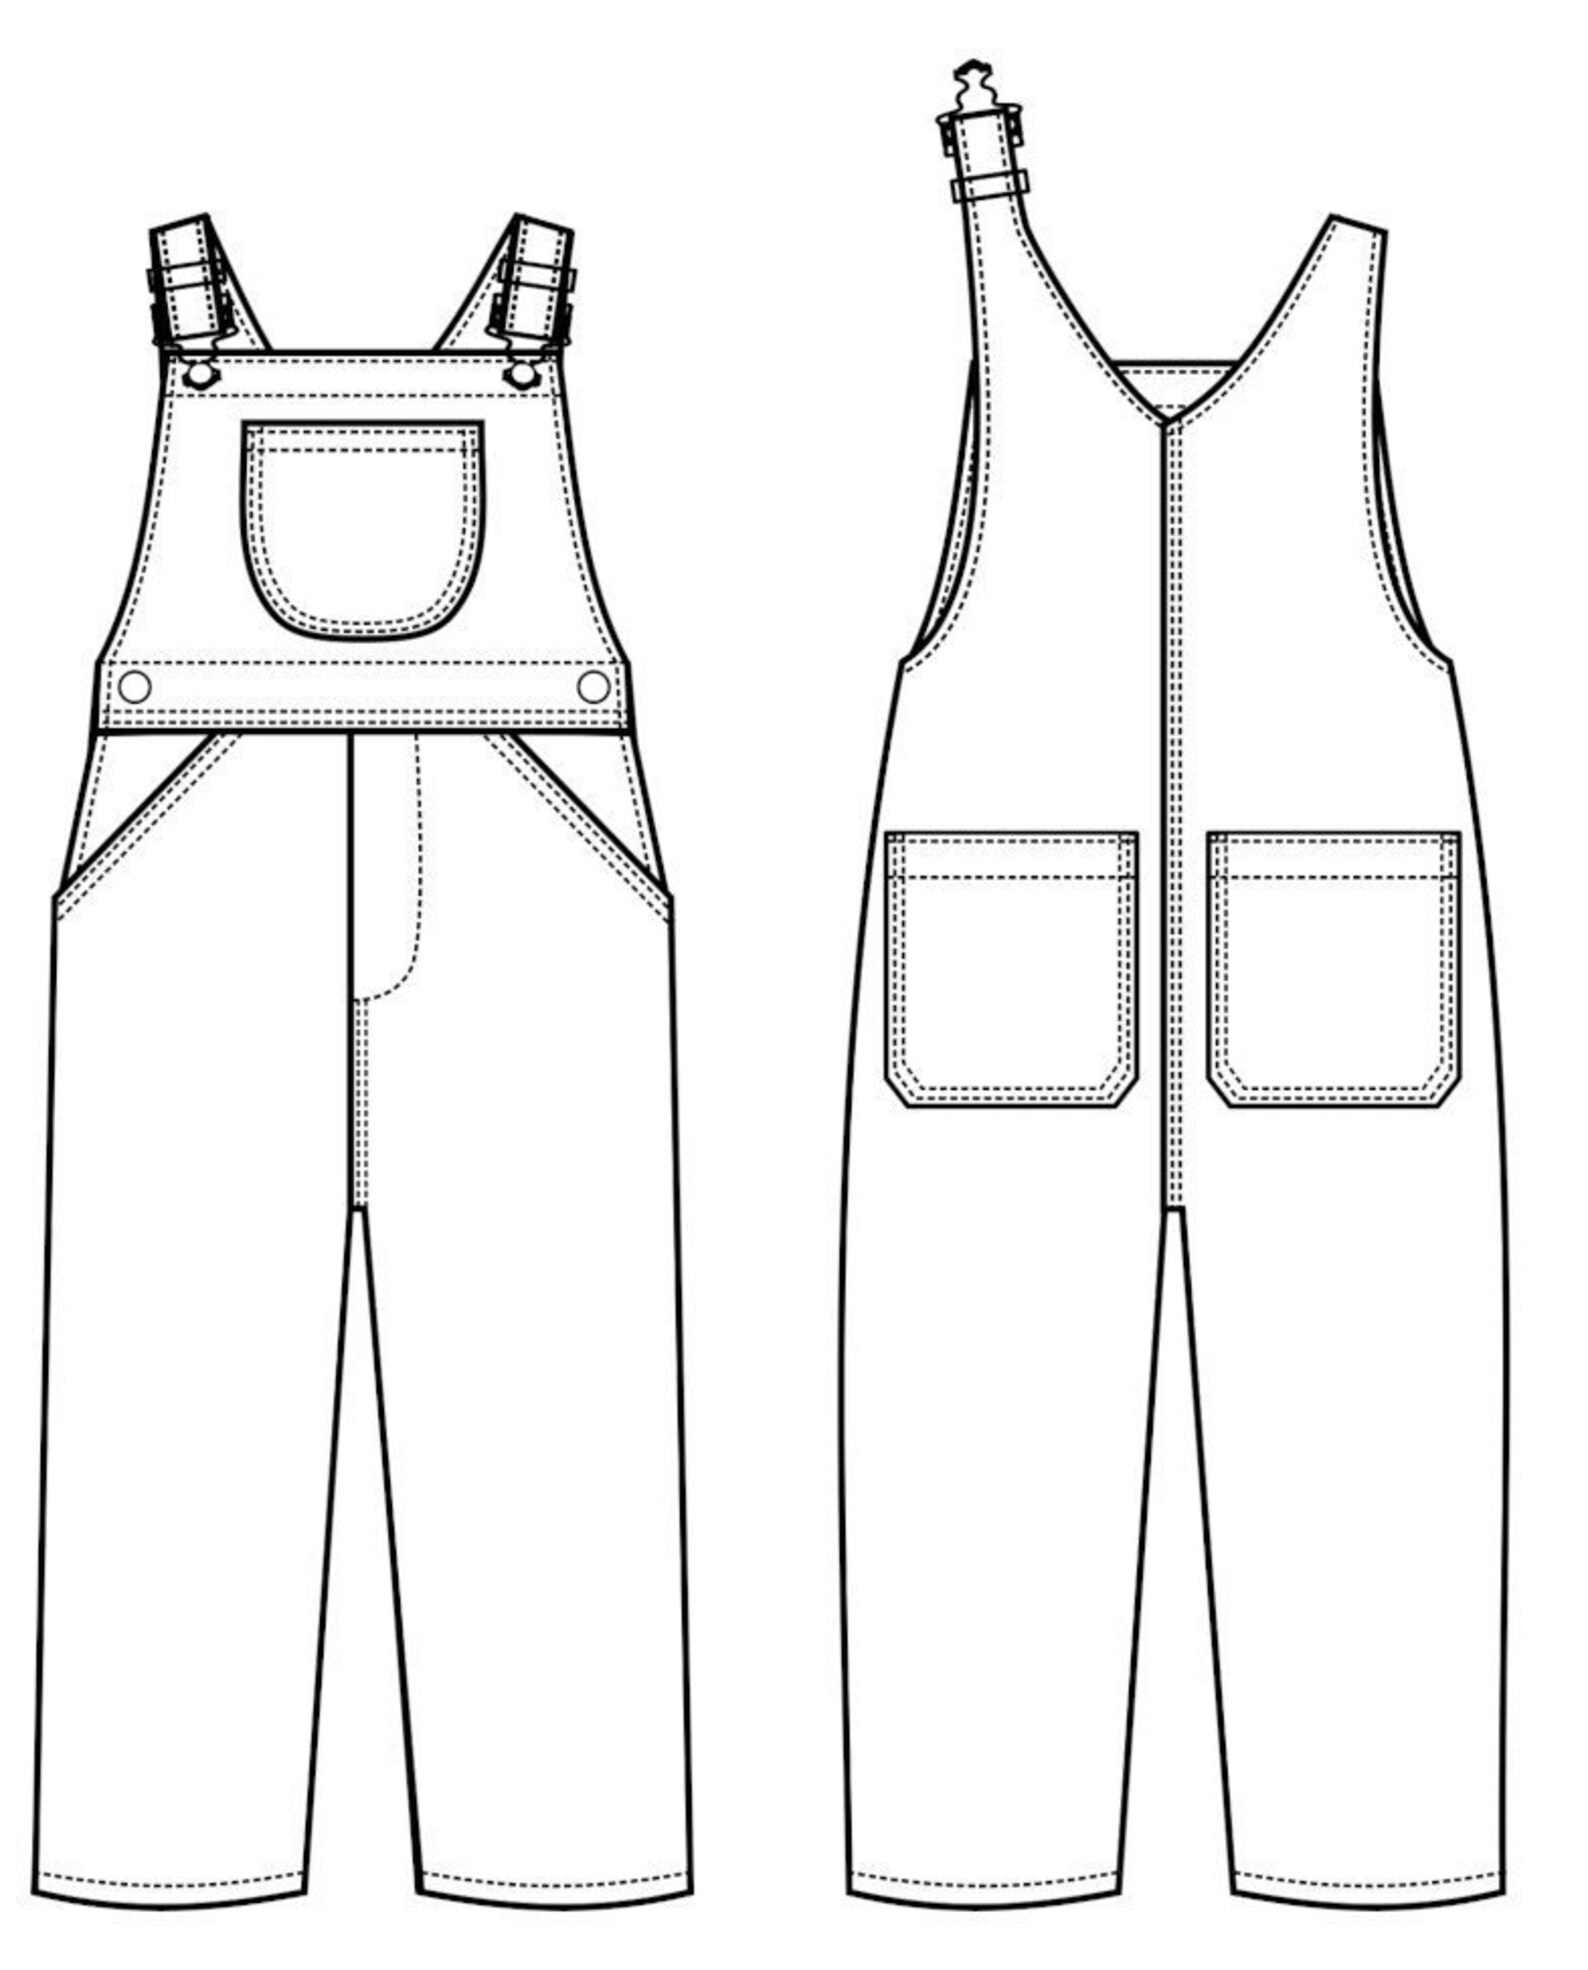 Toddler Overalls Technical Fashion Drawing | Etsy